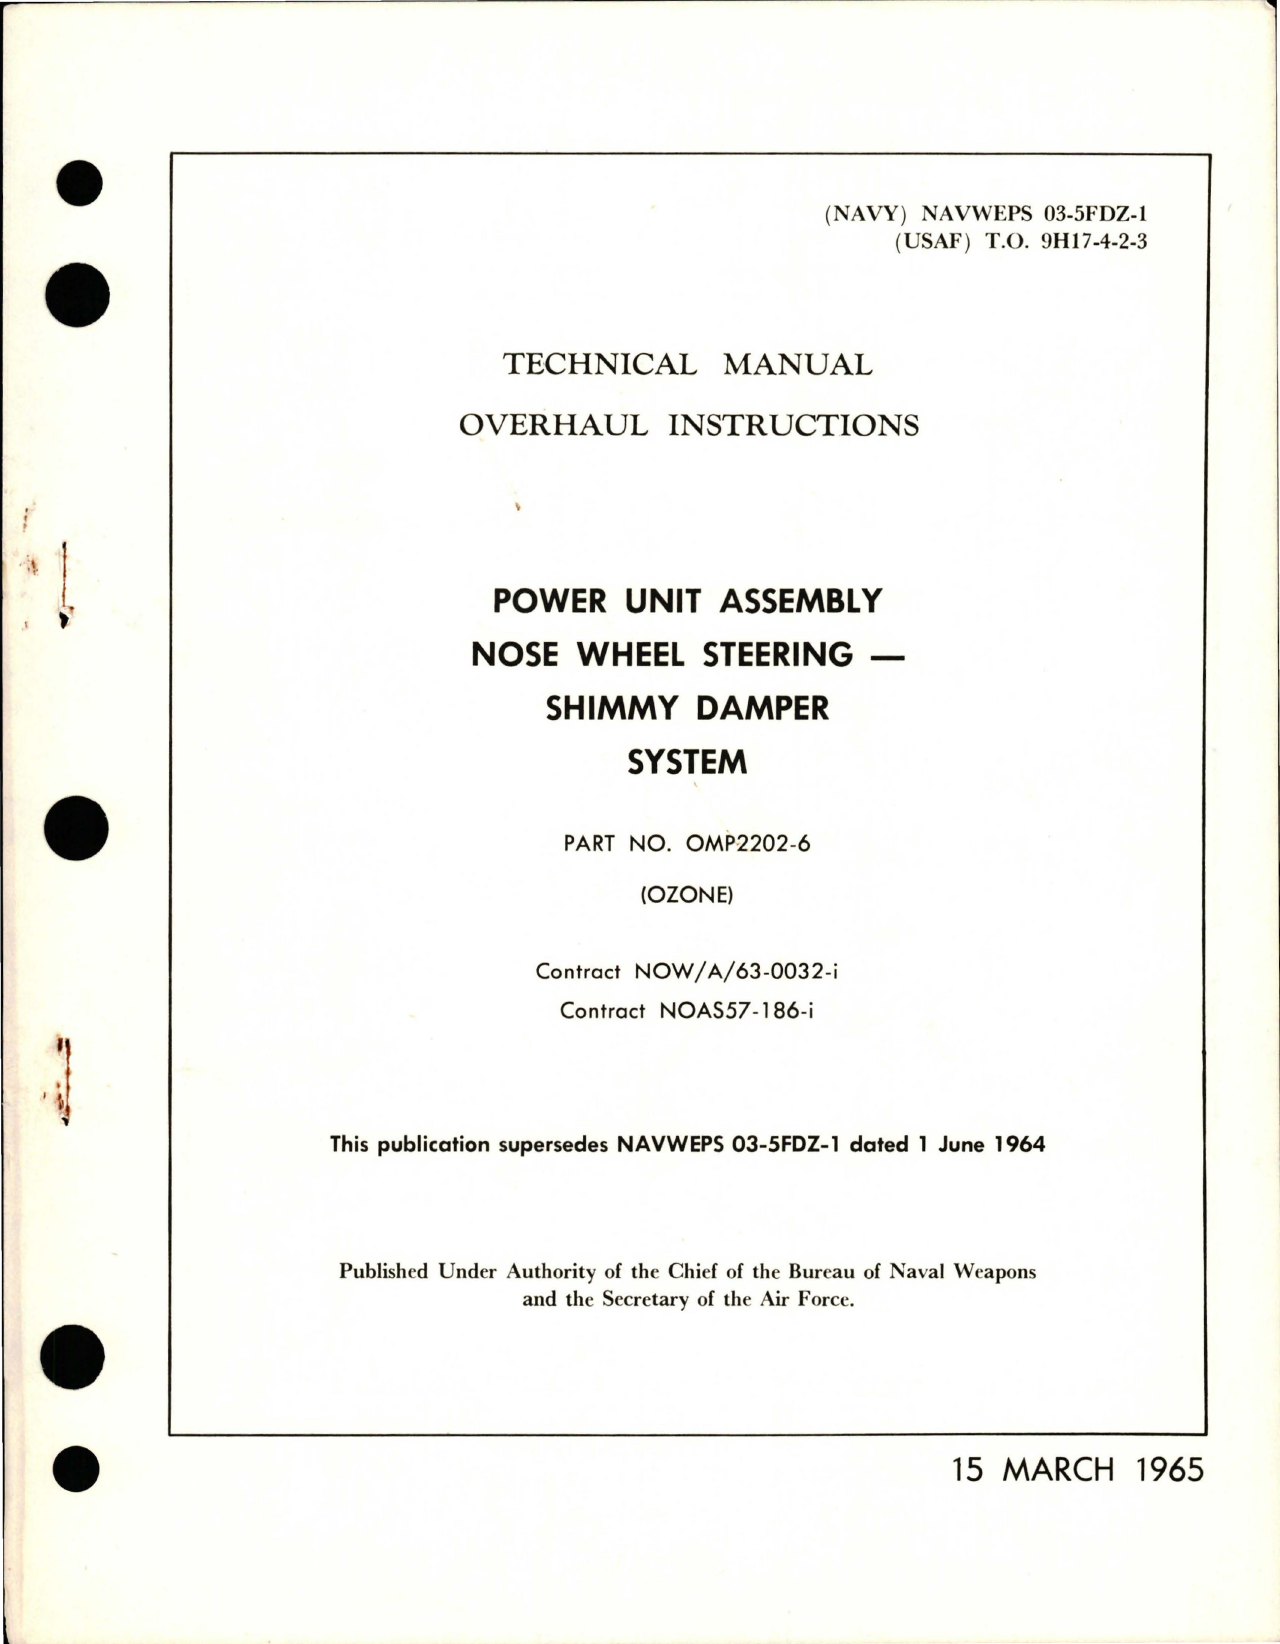 Sample page 1 from AirCorps Library document: Overhaul Instructions for Power Unit Assembly, Nose Wheel Steering Shimmy Damper System - Part OMP2202-6